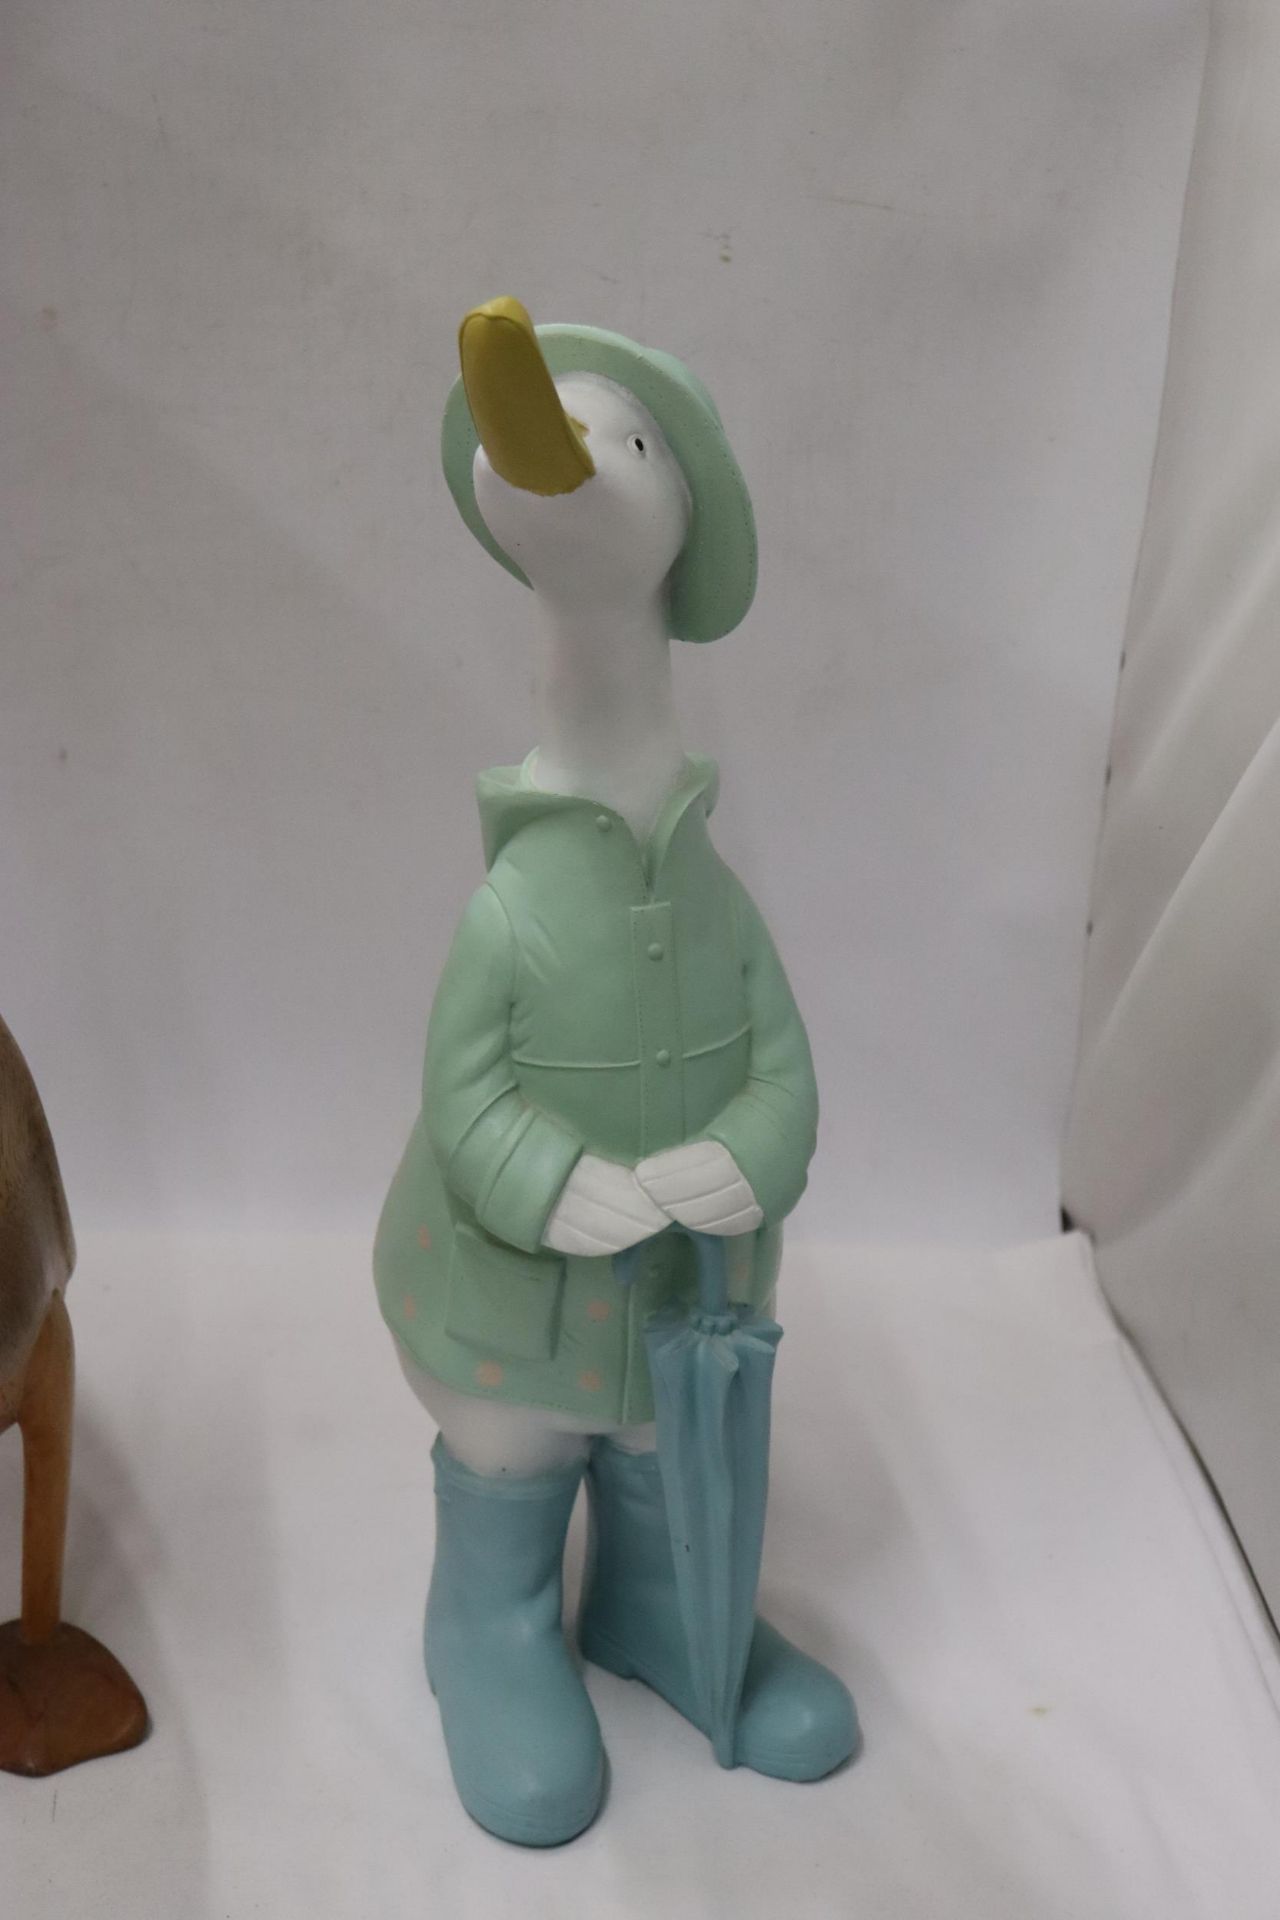 A WOODEN DUCK FROM 'THE DUCK COMPANY' CALLED FRED PLUS A PAINTED DUCK, HEIGHTS 42CM - Image 7 of 7